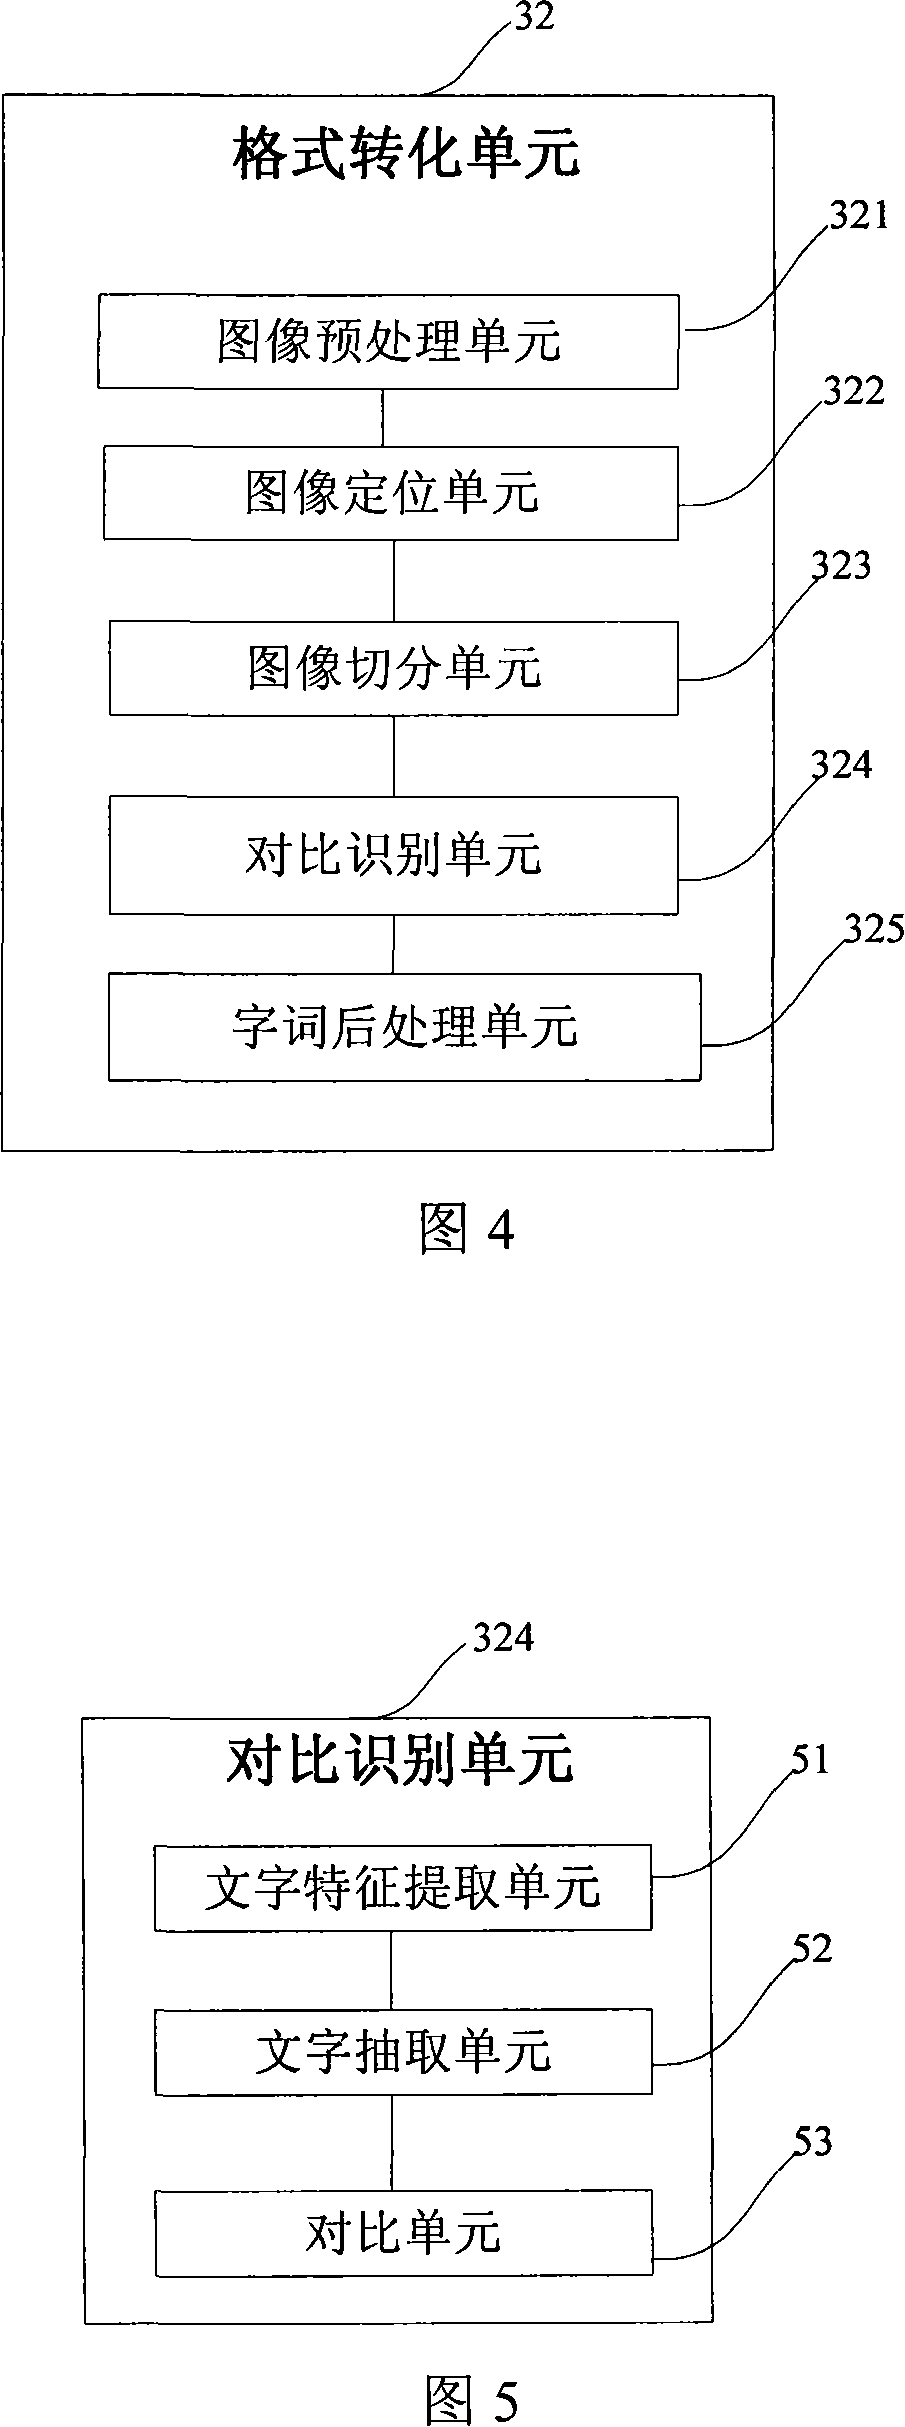 Electronic equipments and text inputting method